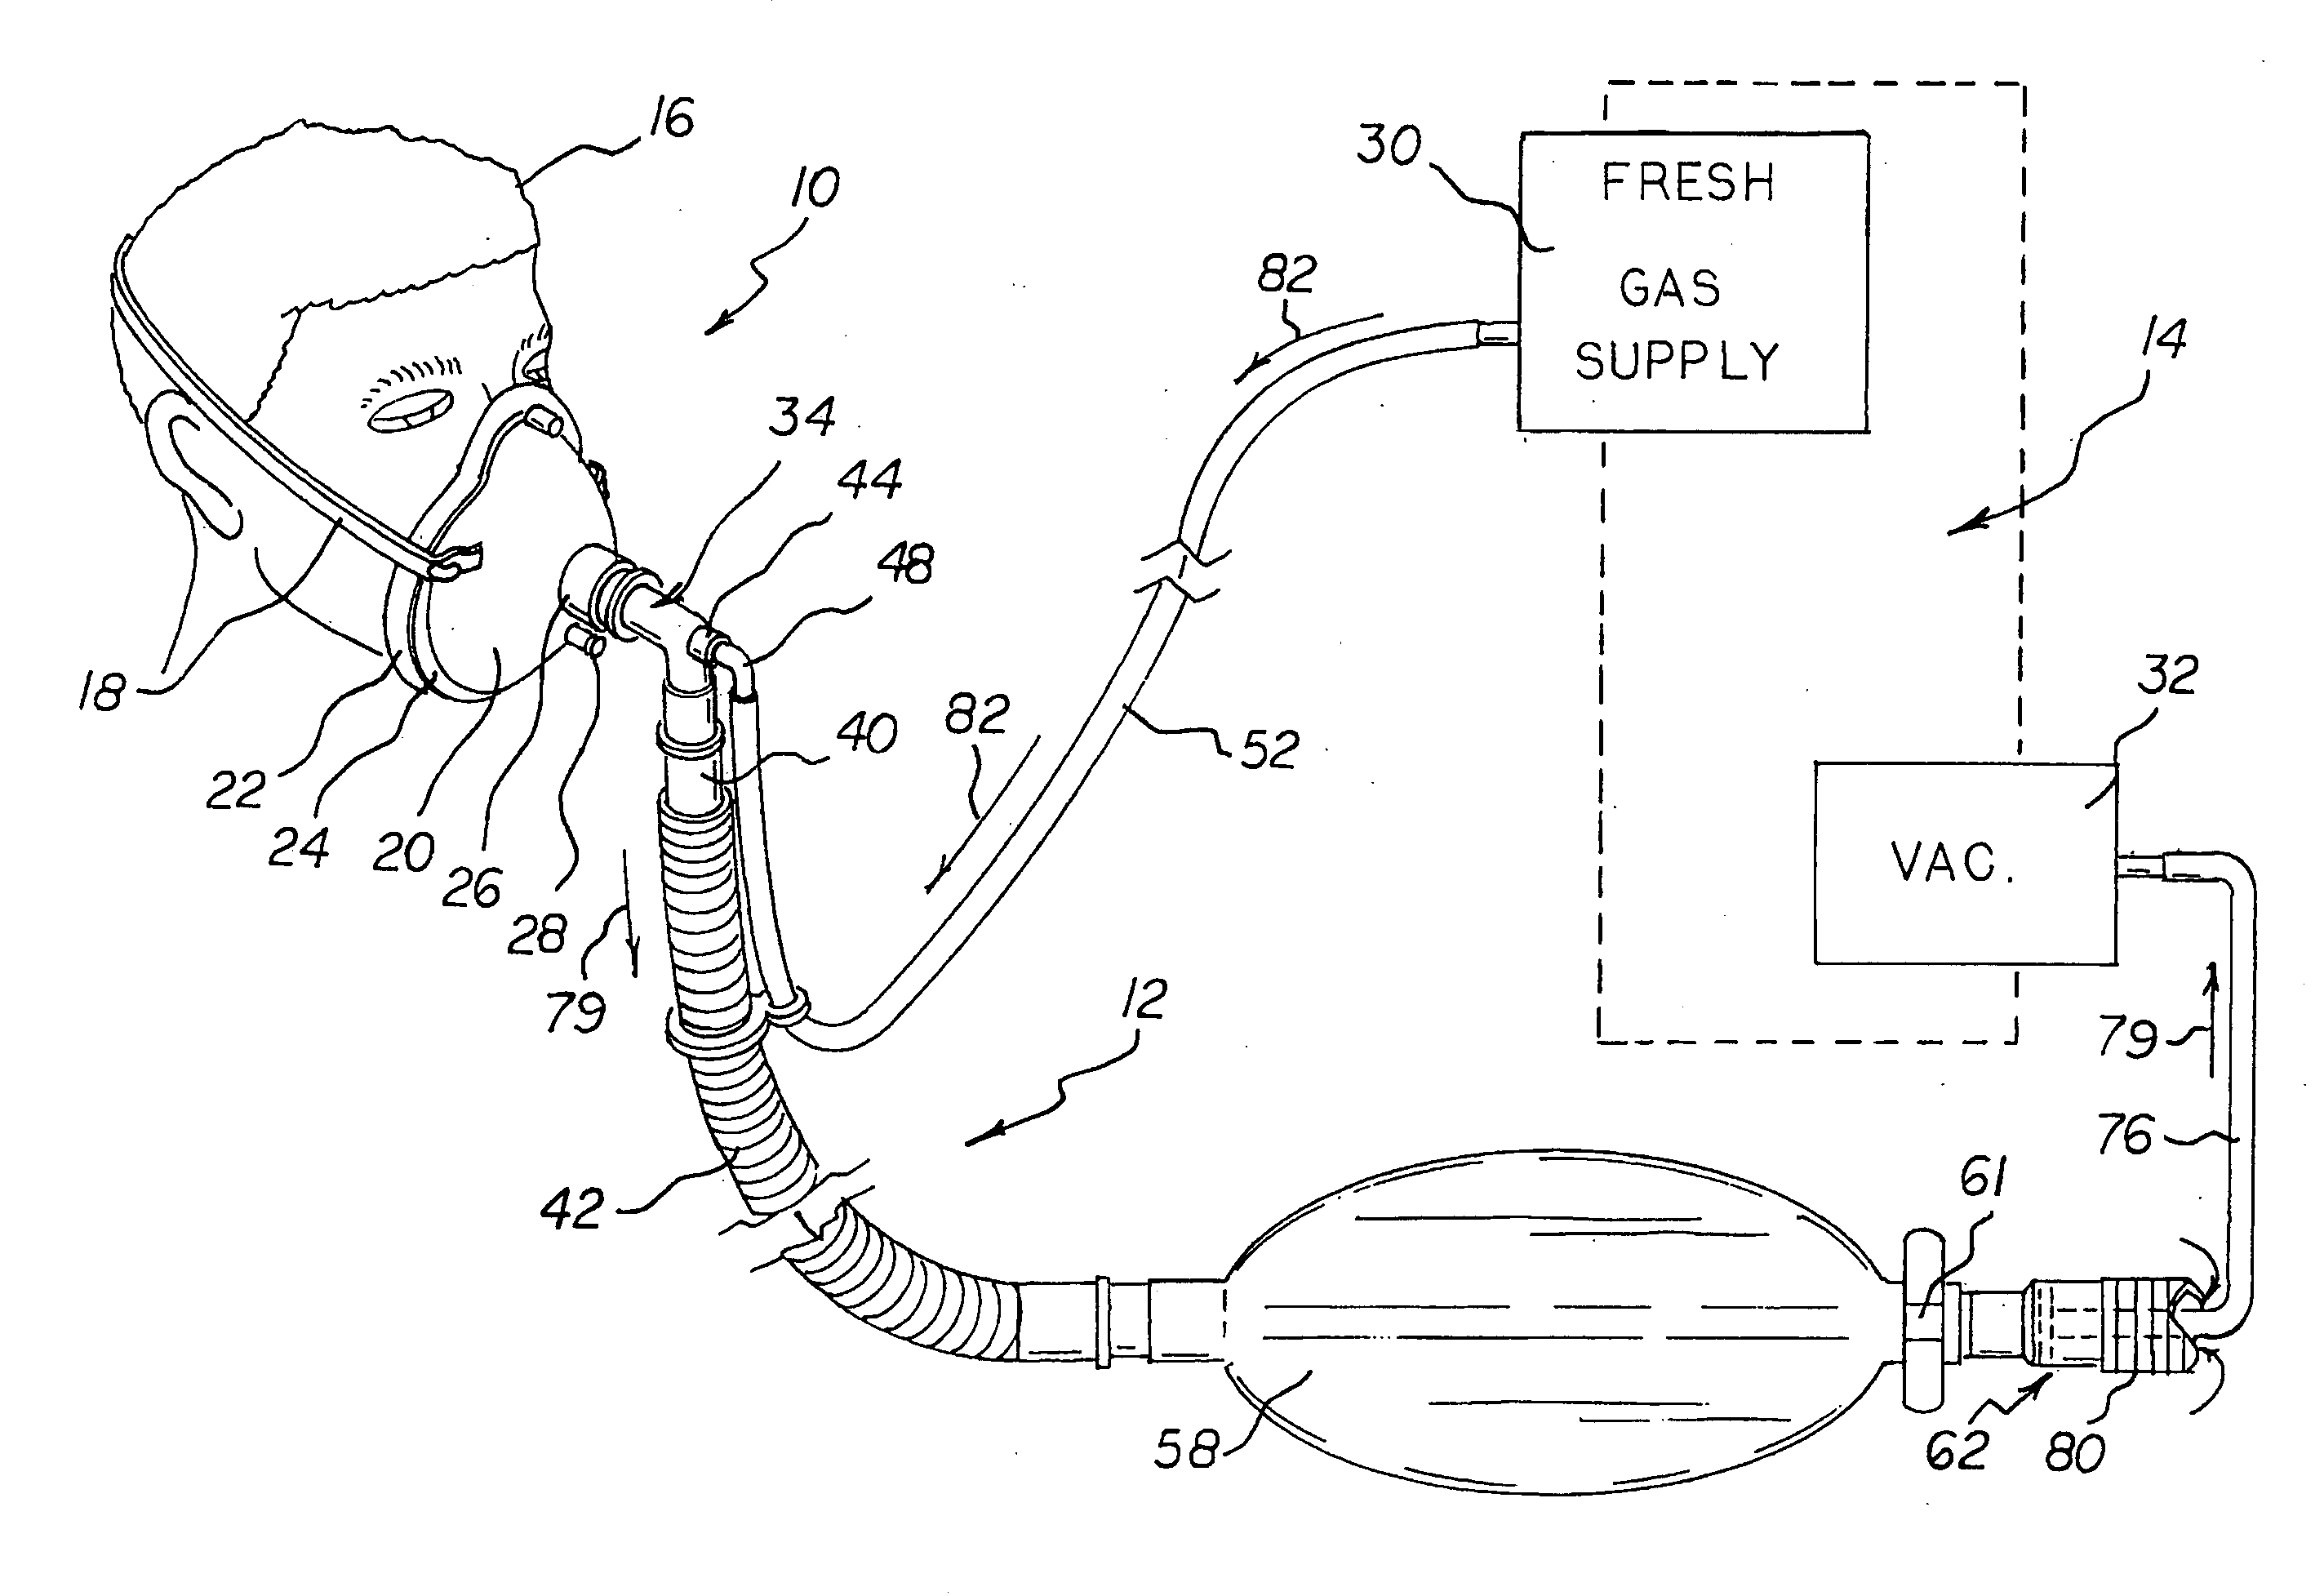 Respiratory face mask and breathing circuit assembly